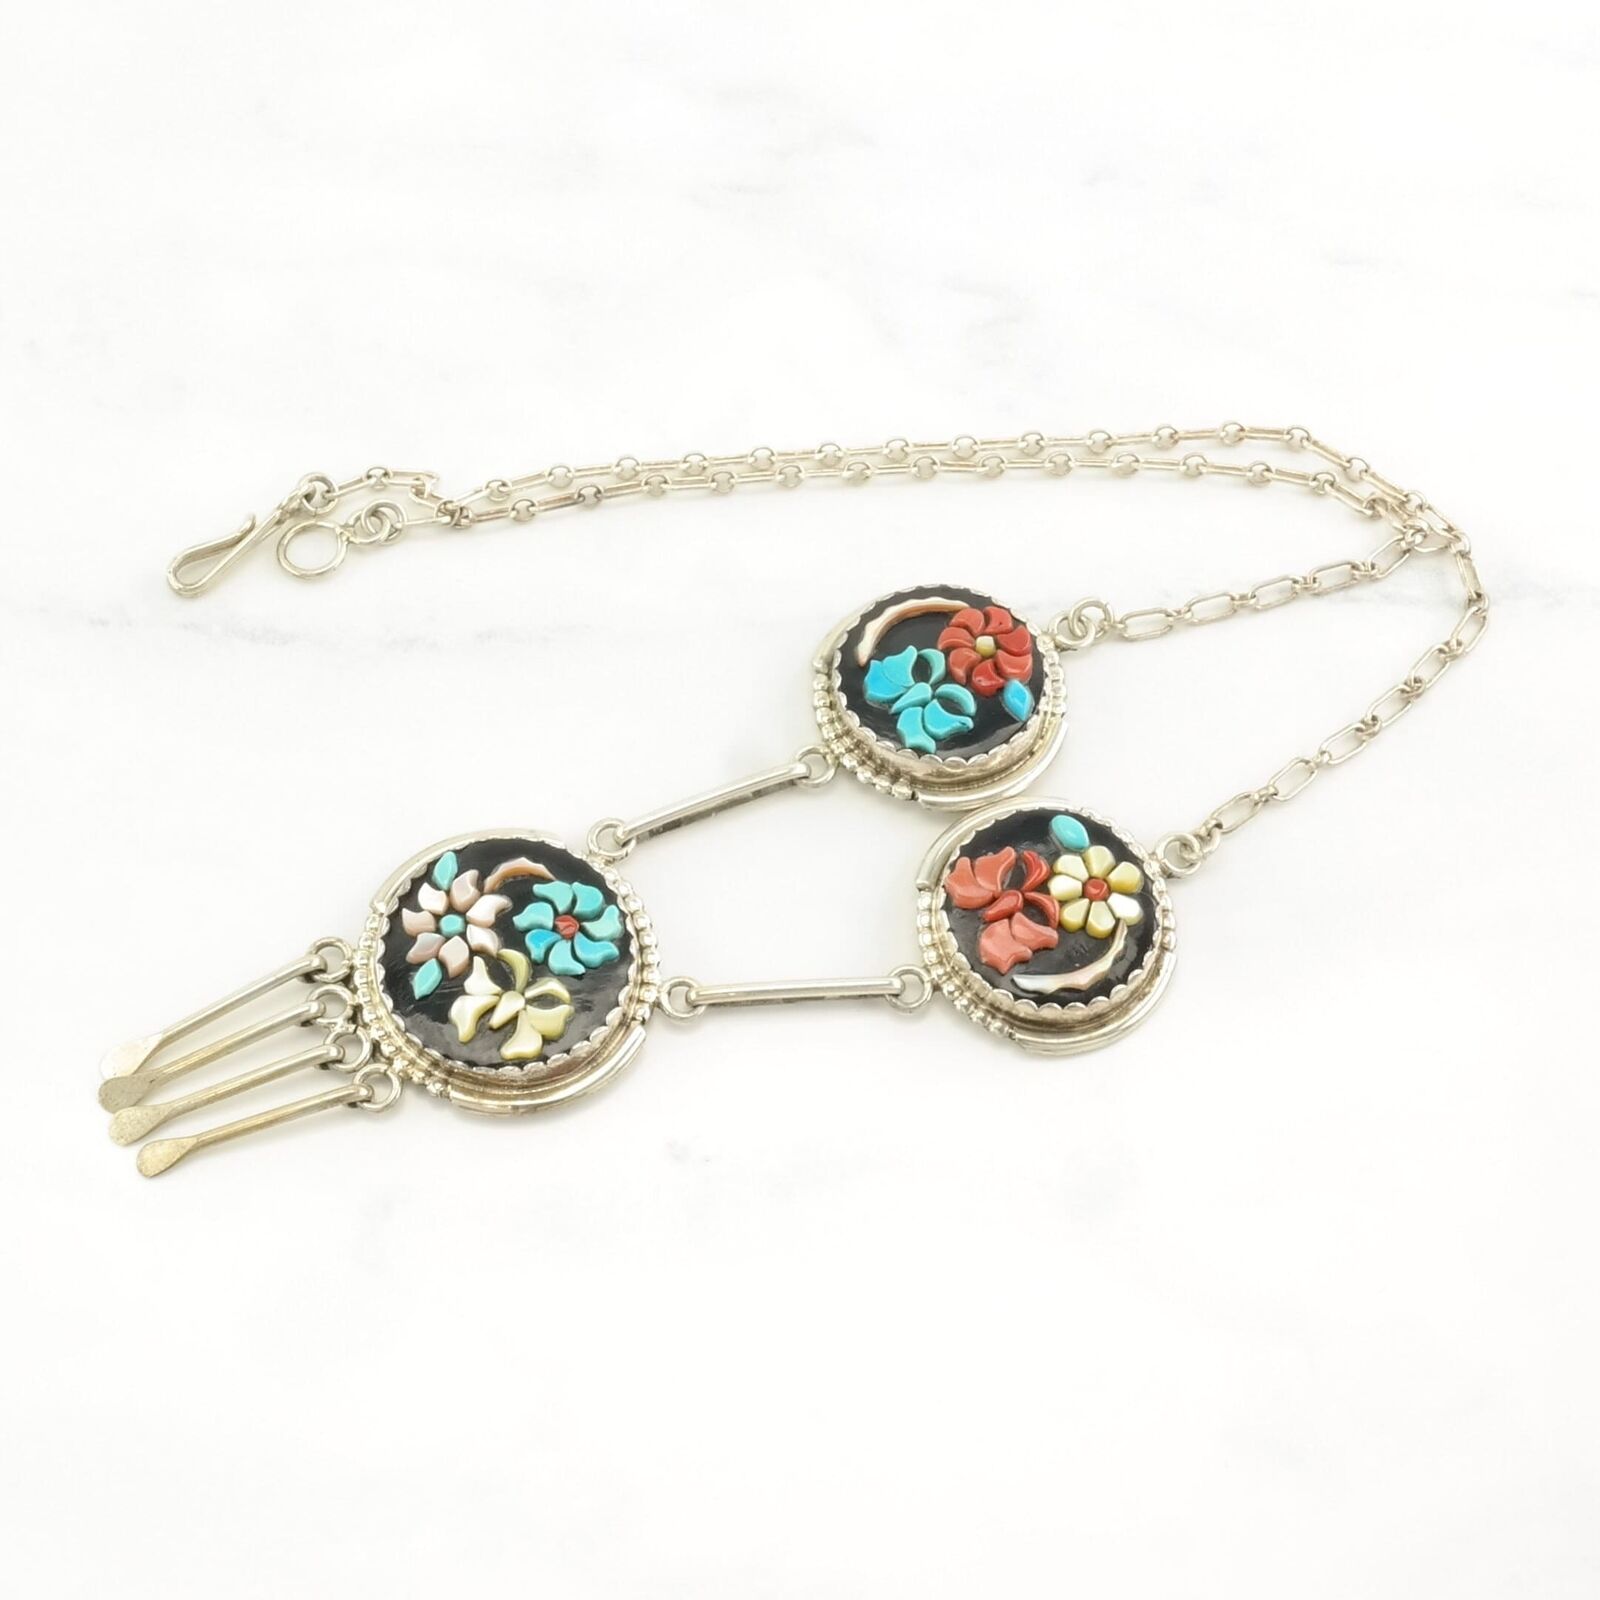 Vintage Zuni Sterling Silver Onyx, Coral, Turquoise, MOP Floral Necklace